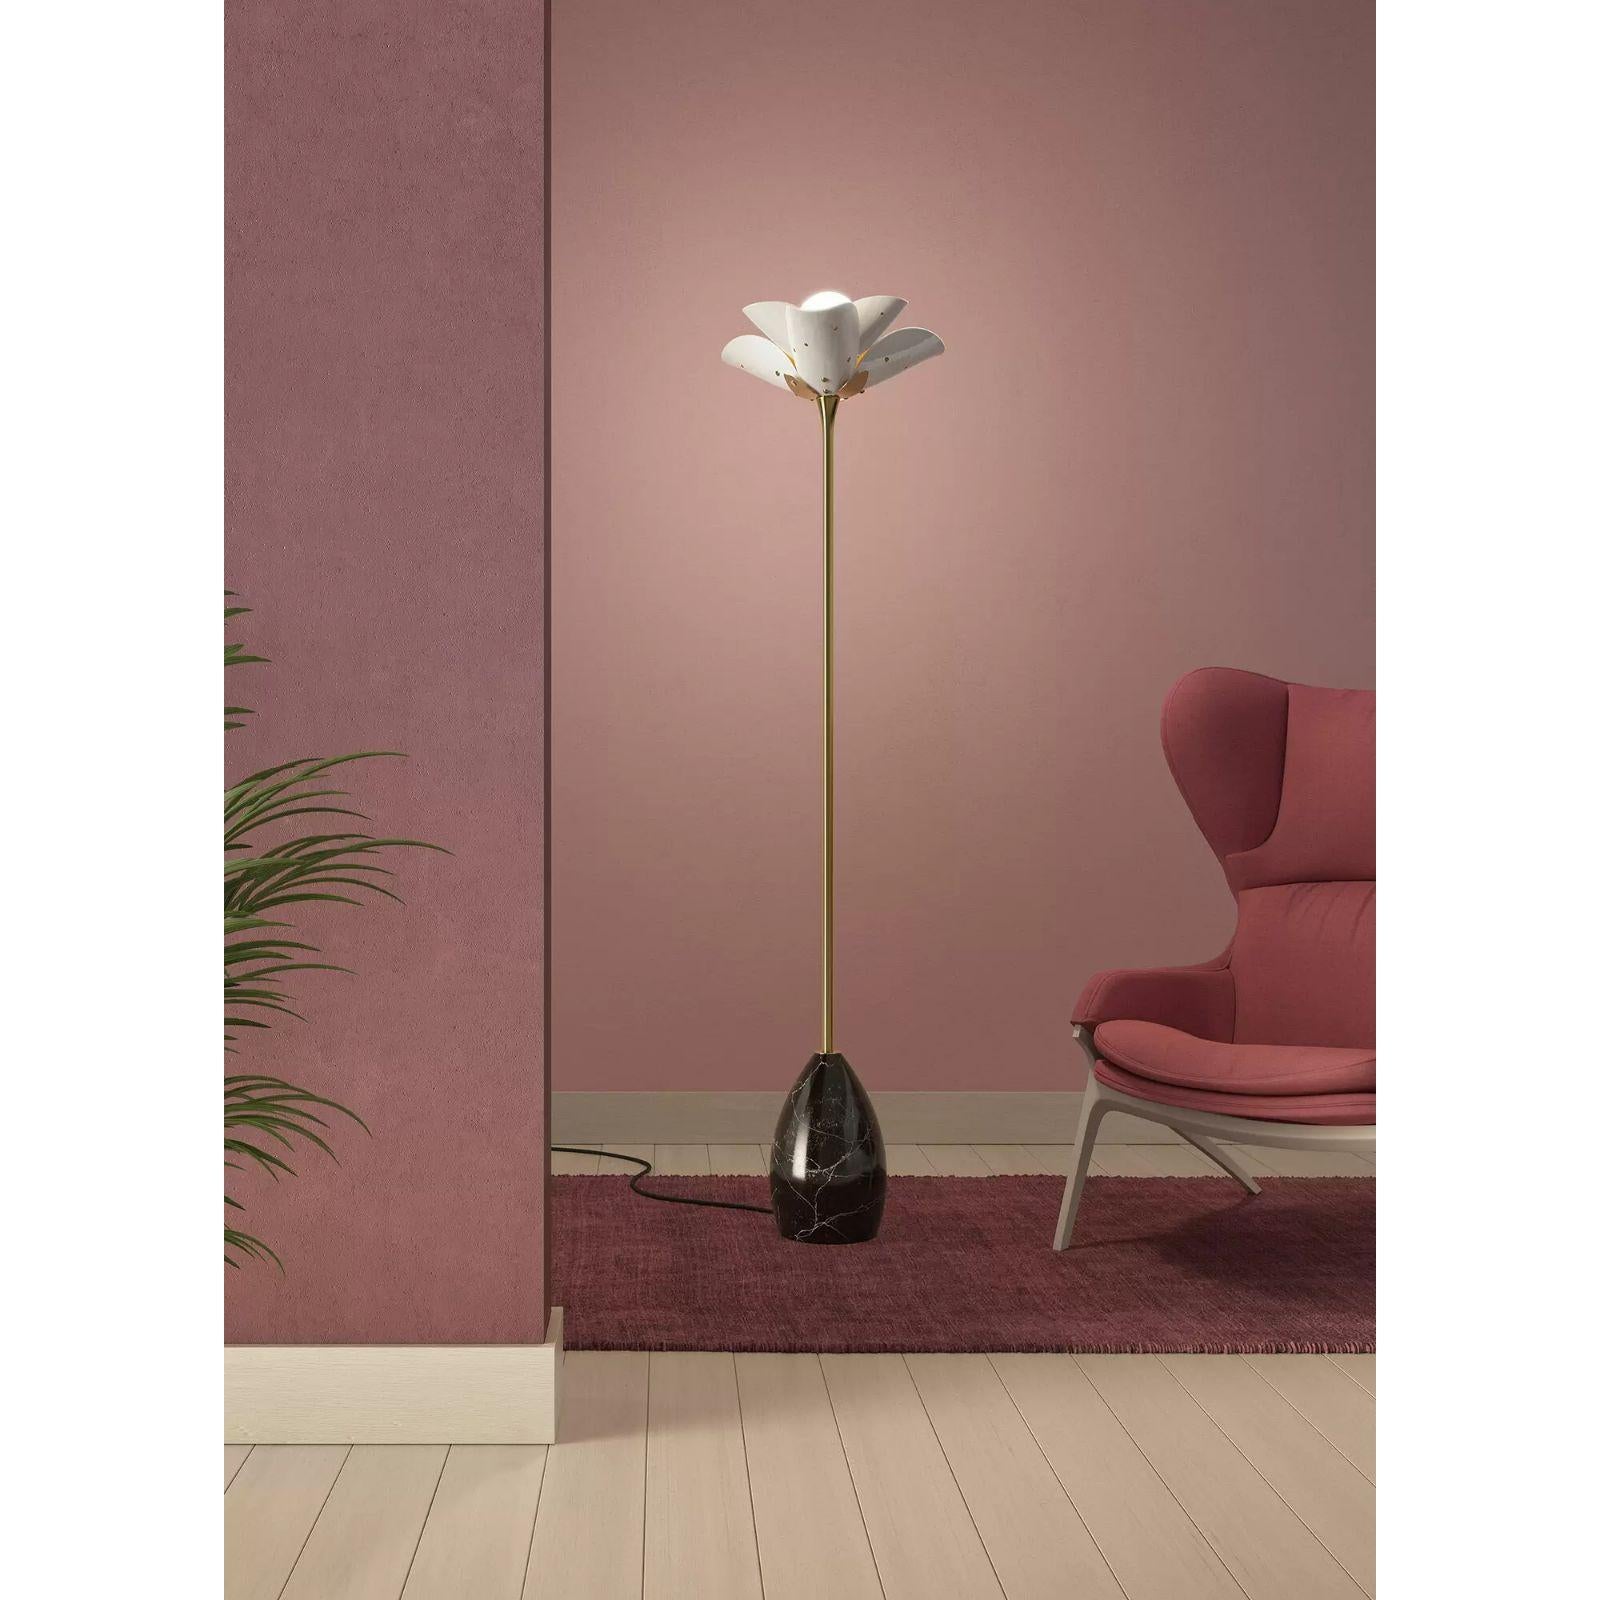 Blossom White and Golden Luster Floor Lamp (US)

Details: 
Insurance included: No
Height (in): 66.929
Width (in): 18.504
Length (in): 18.504
Finished: Gloss and gold lustre
Wireless: No
Porcelain Type: Gloss and gold lustre
Sculptor: Dept. Design